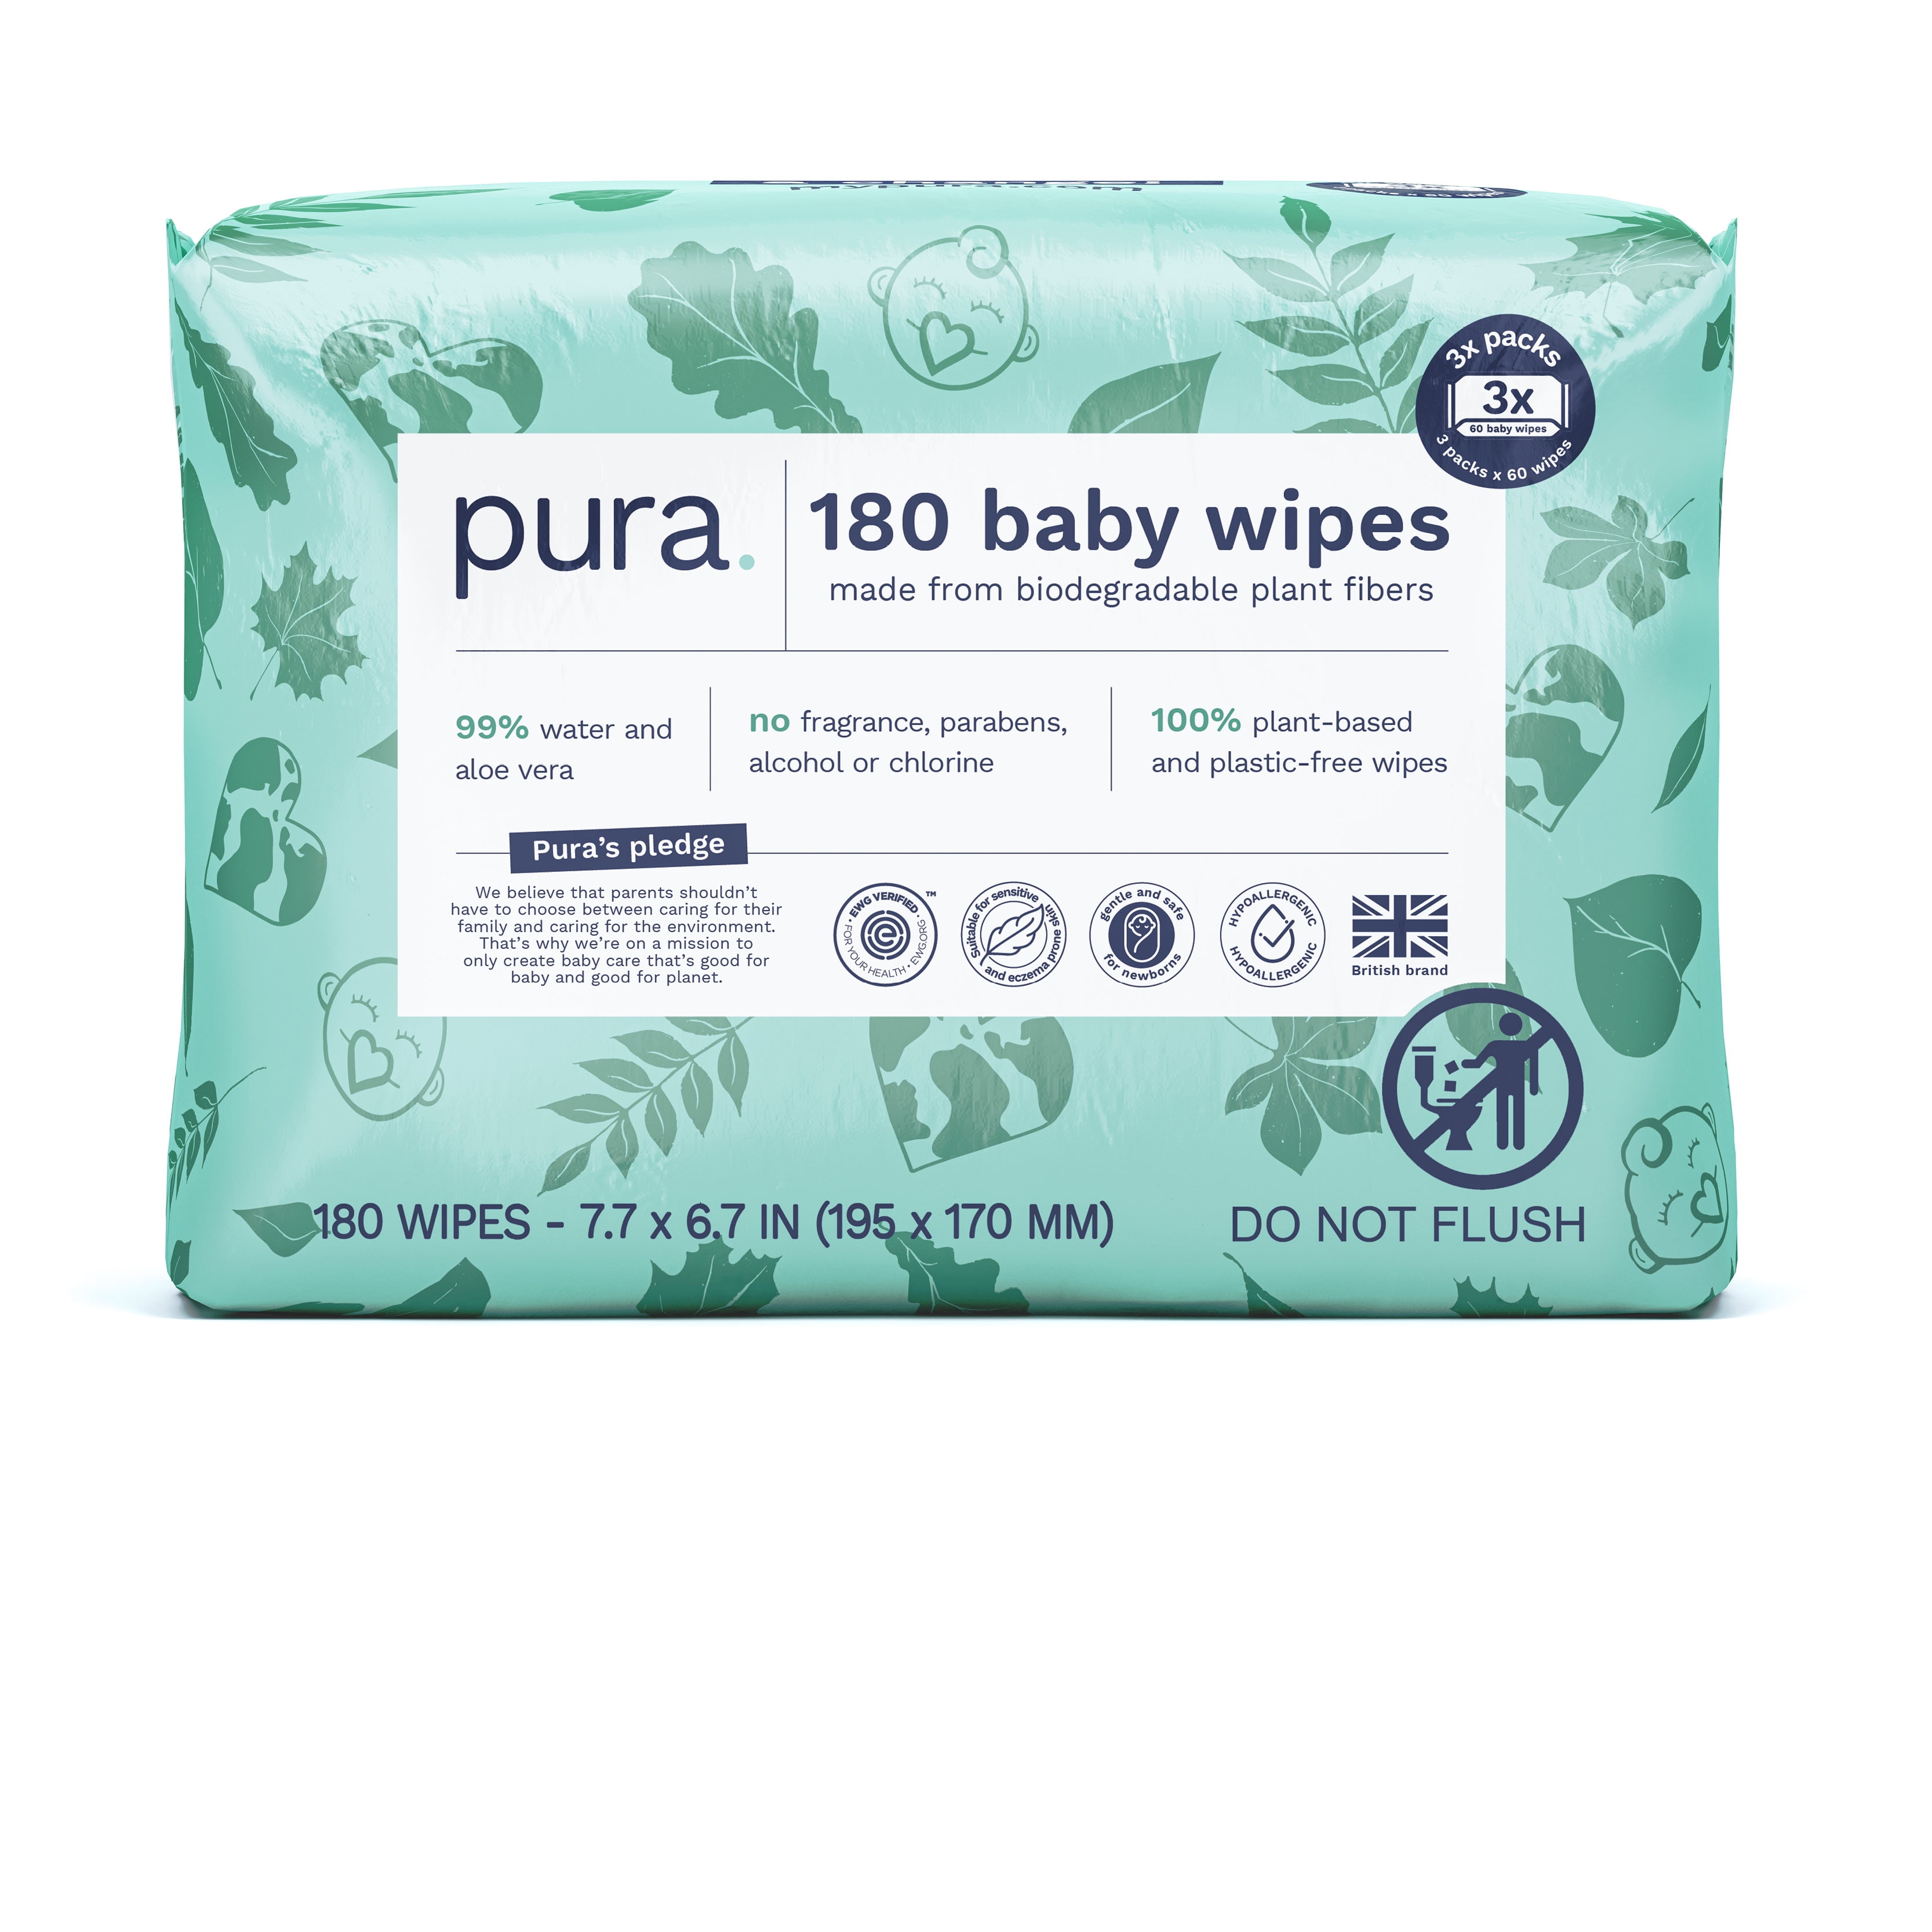 Baby Wipes, Momcozy Saline Nose and Face Baby Wipes, Made Only With Natural  Saline, Mild and Non-irritating, 100% Biodegradable, Unscented 